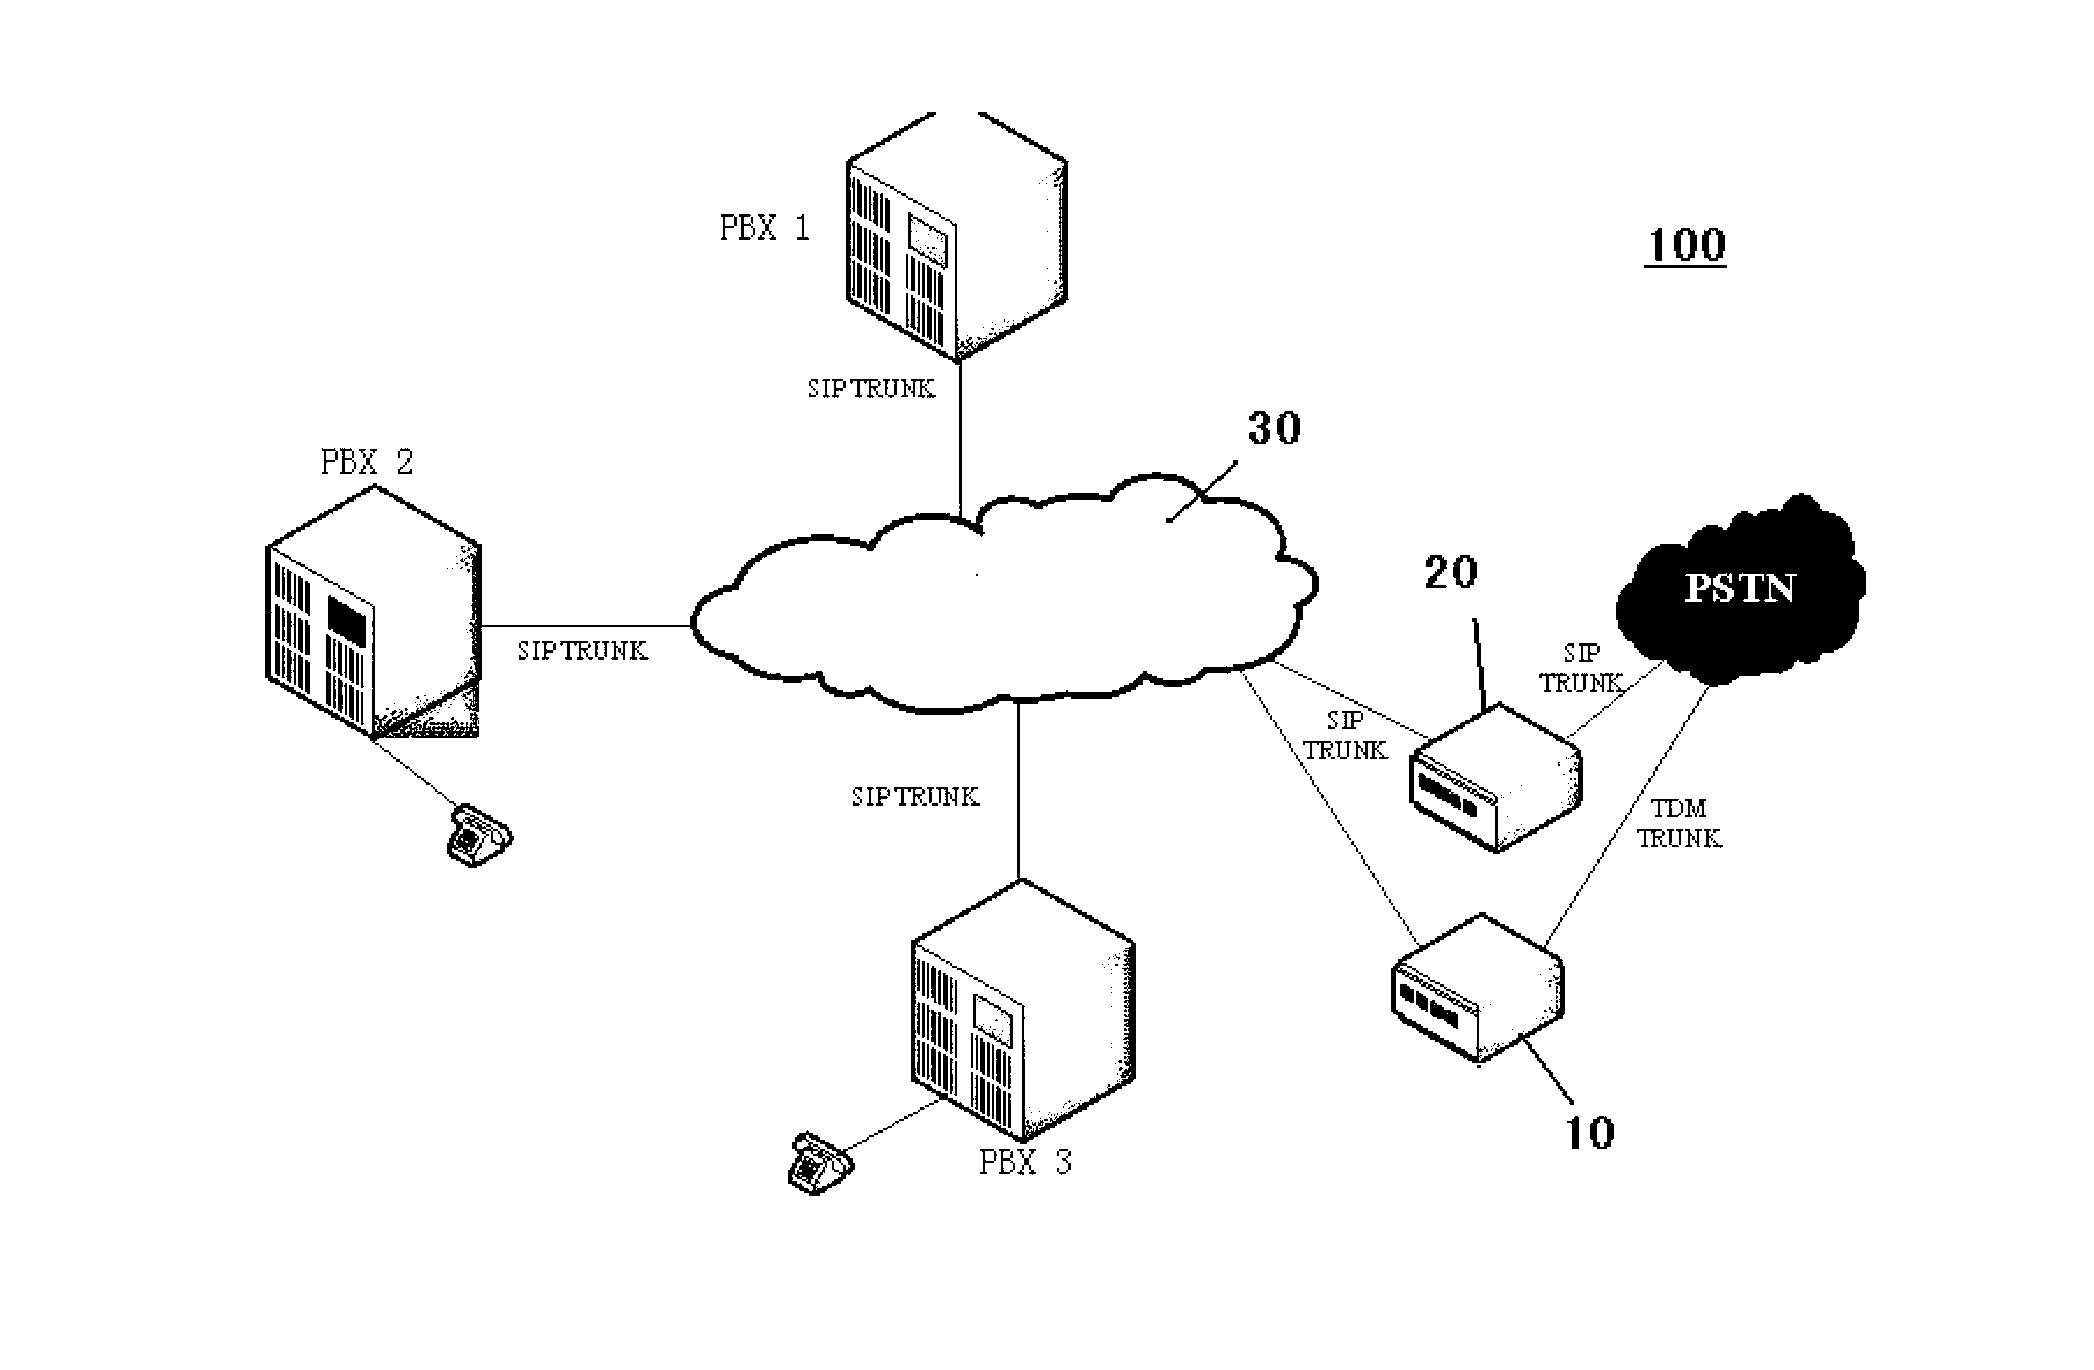 Large-scale call center trunk circuit access system